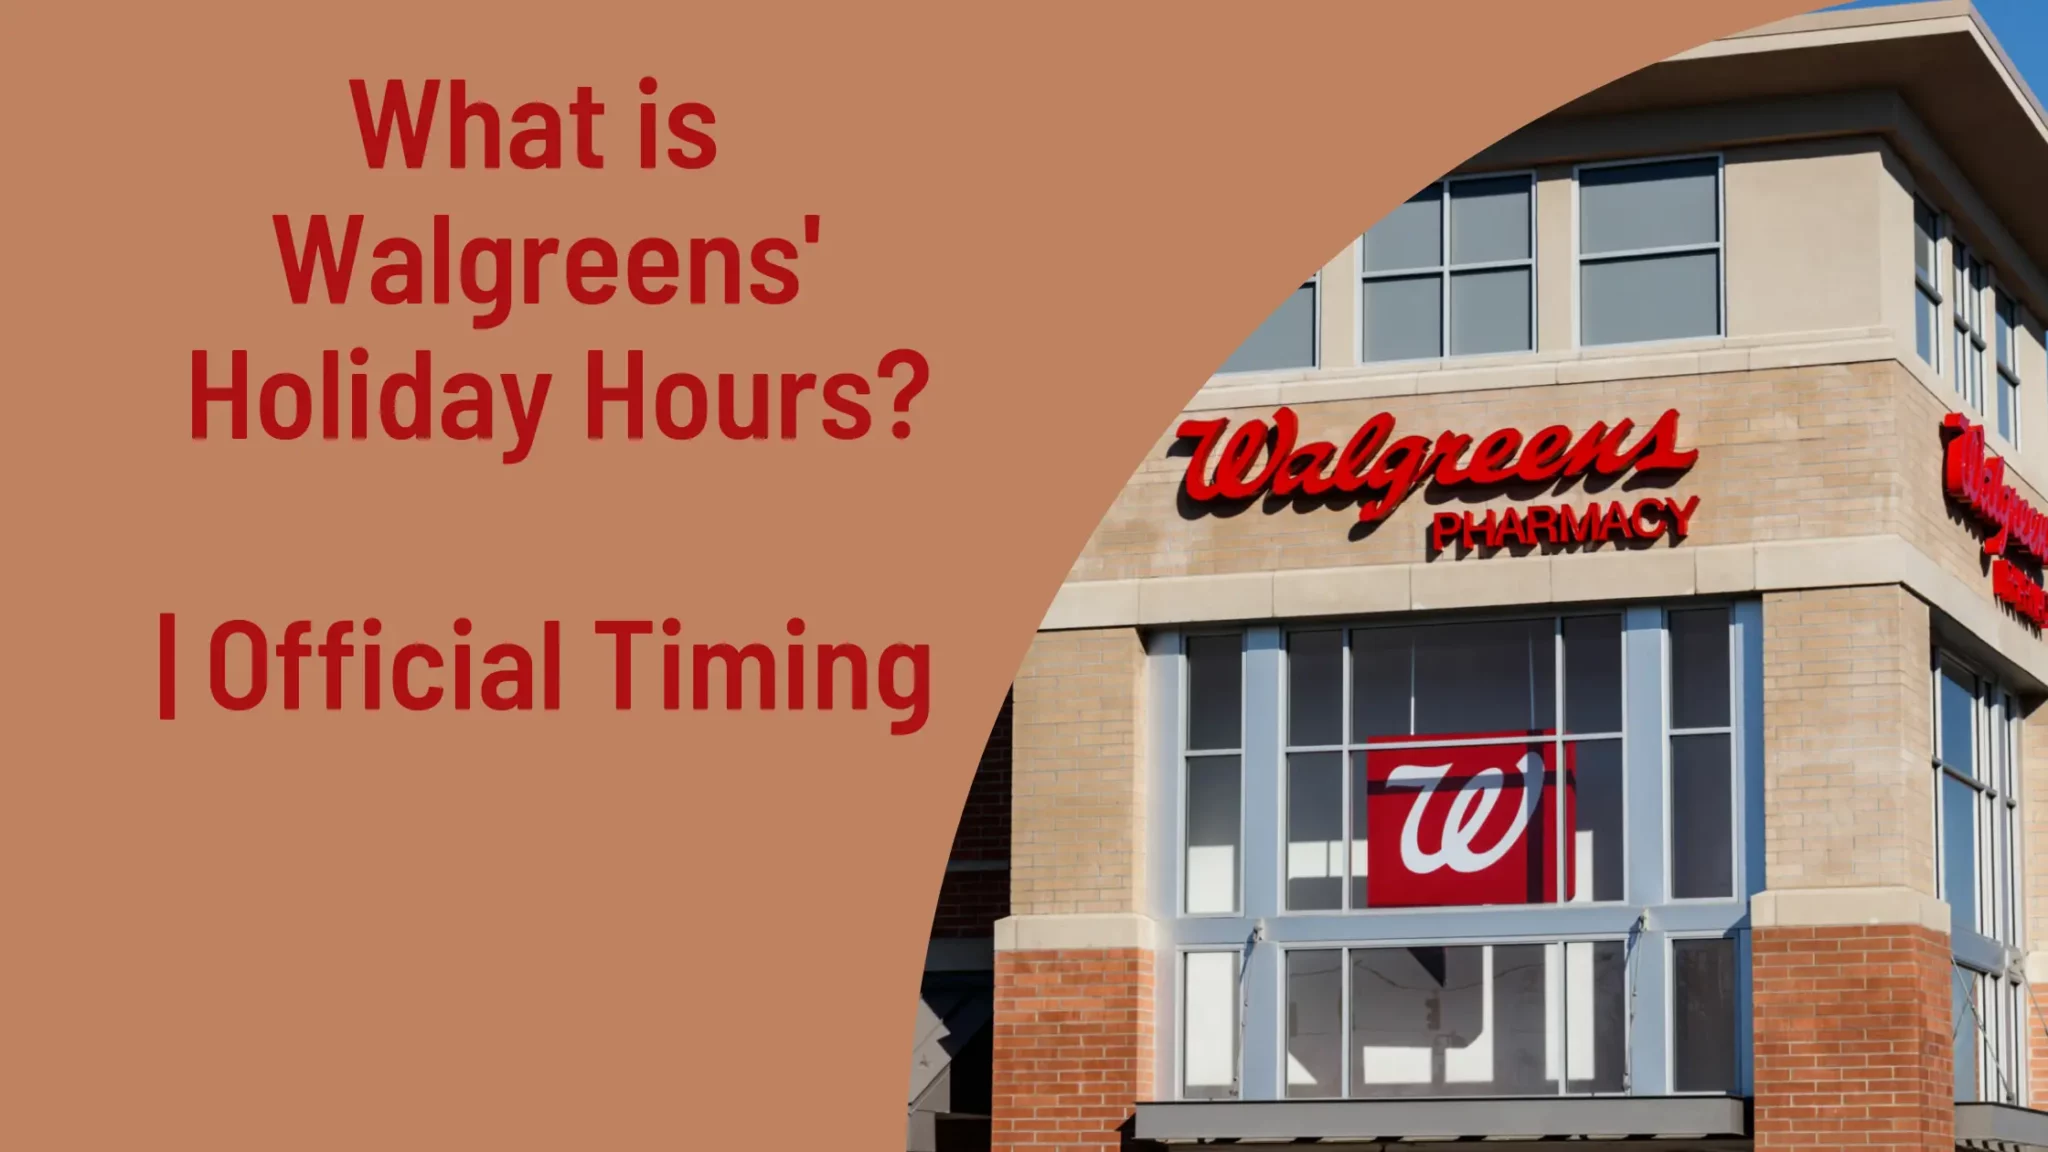 What is Walgreens' Holiday Hours?